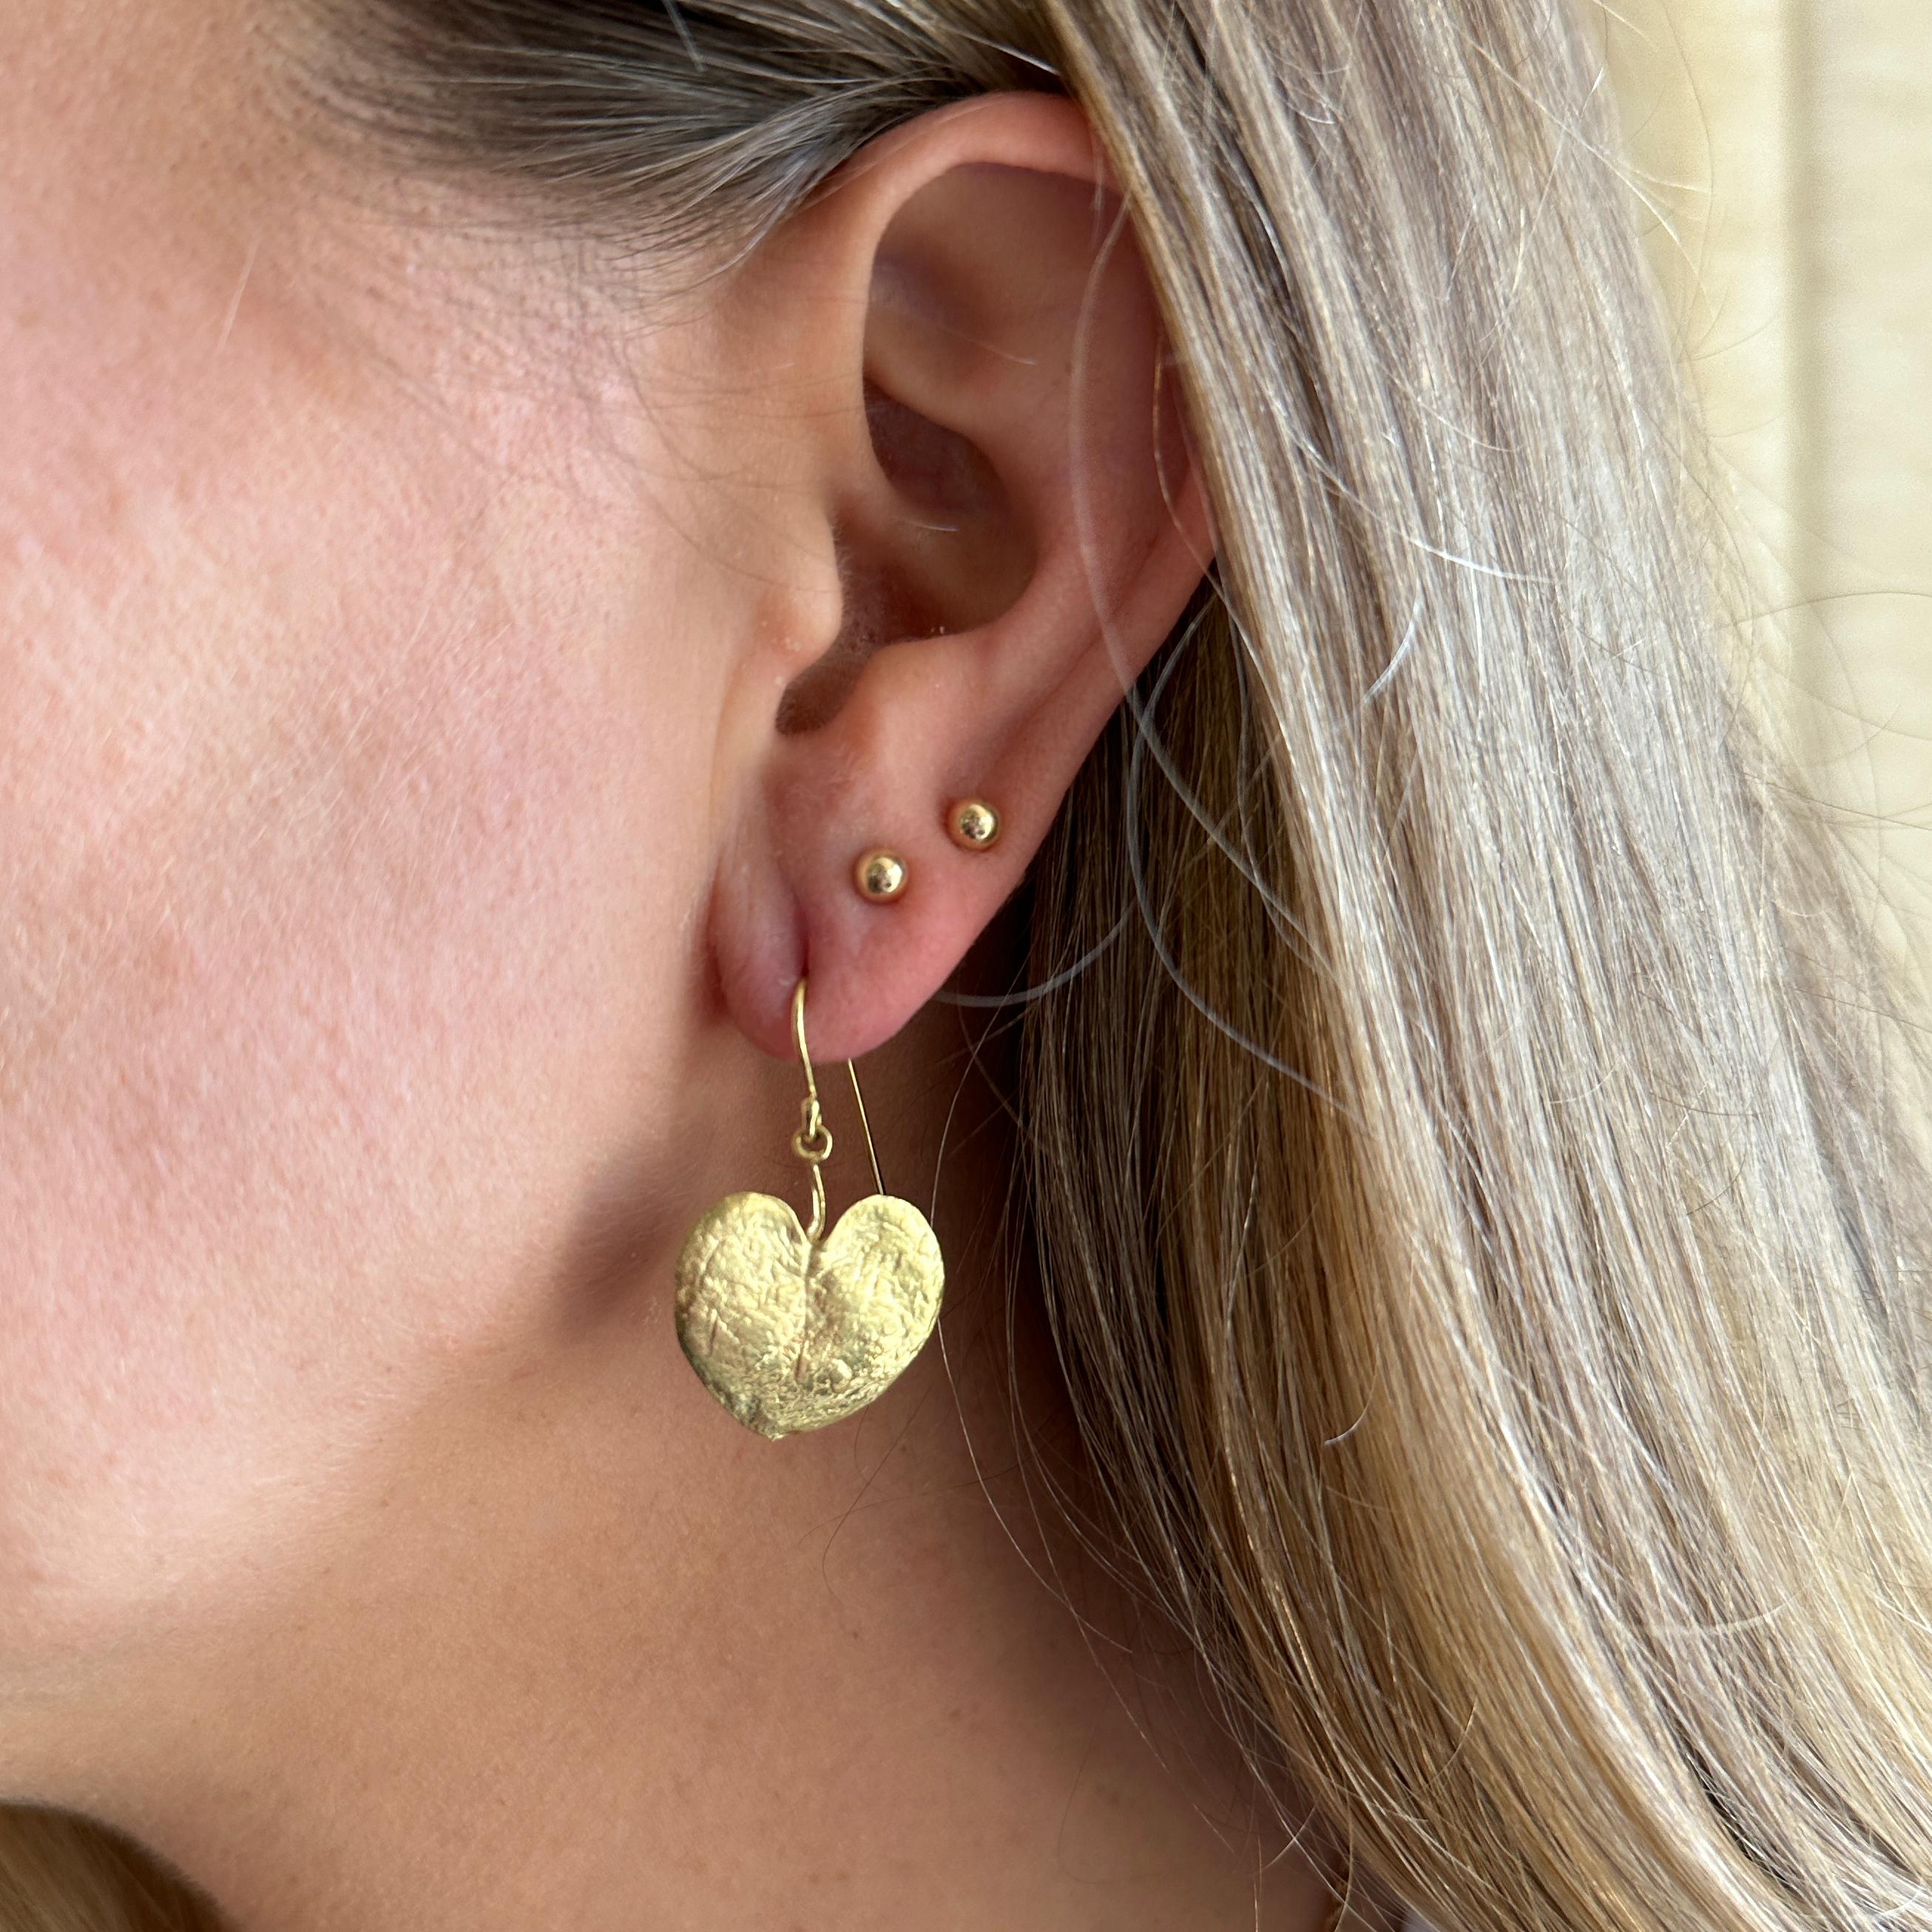 Eytan Brandes used actual leaves to make the wax molds for these earrings, so they're naturally mismatched, whisper-thin and super-lightweight.  

The stems are hinged to shepherd's hook closures.  Simple but not demure and very fun to wear in rich,